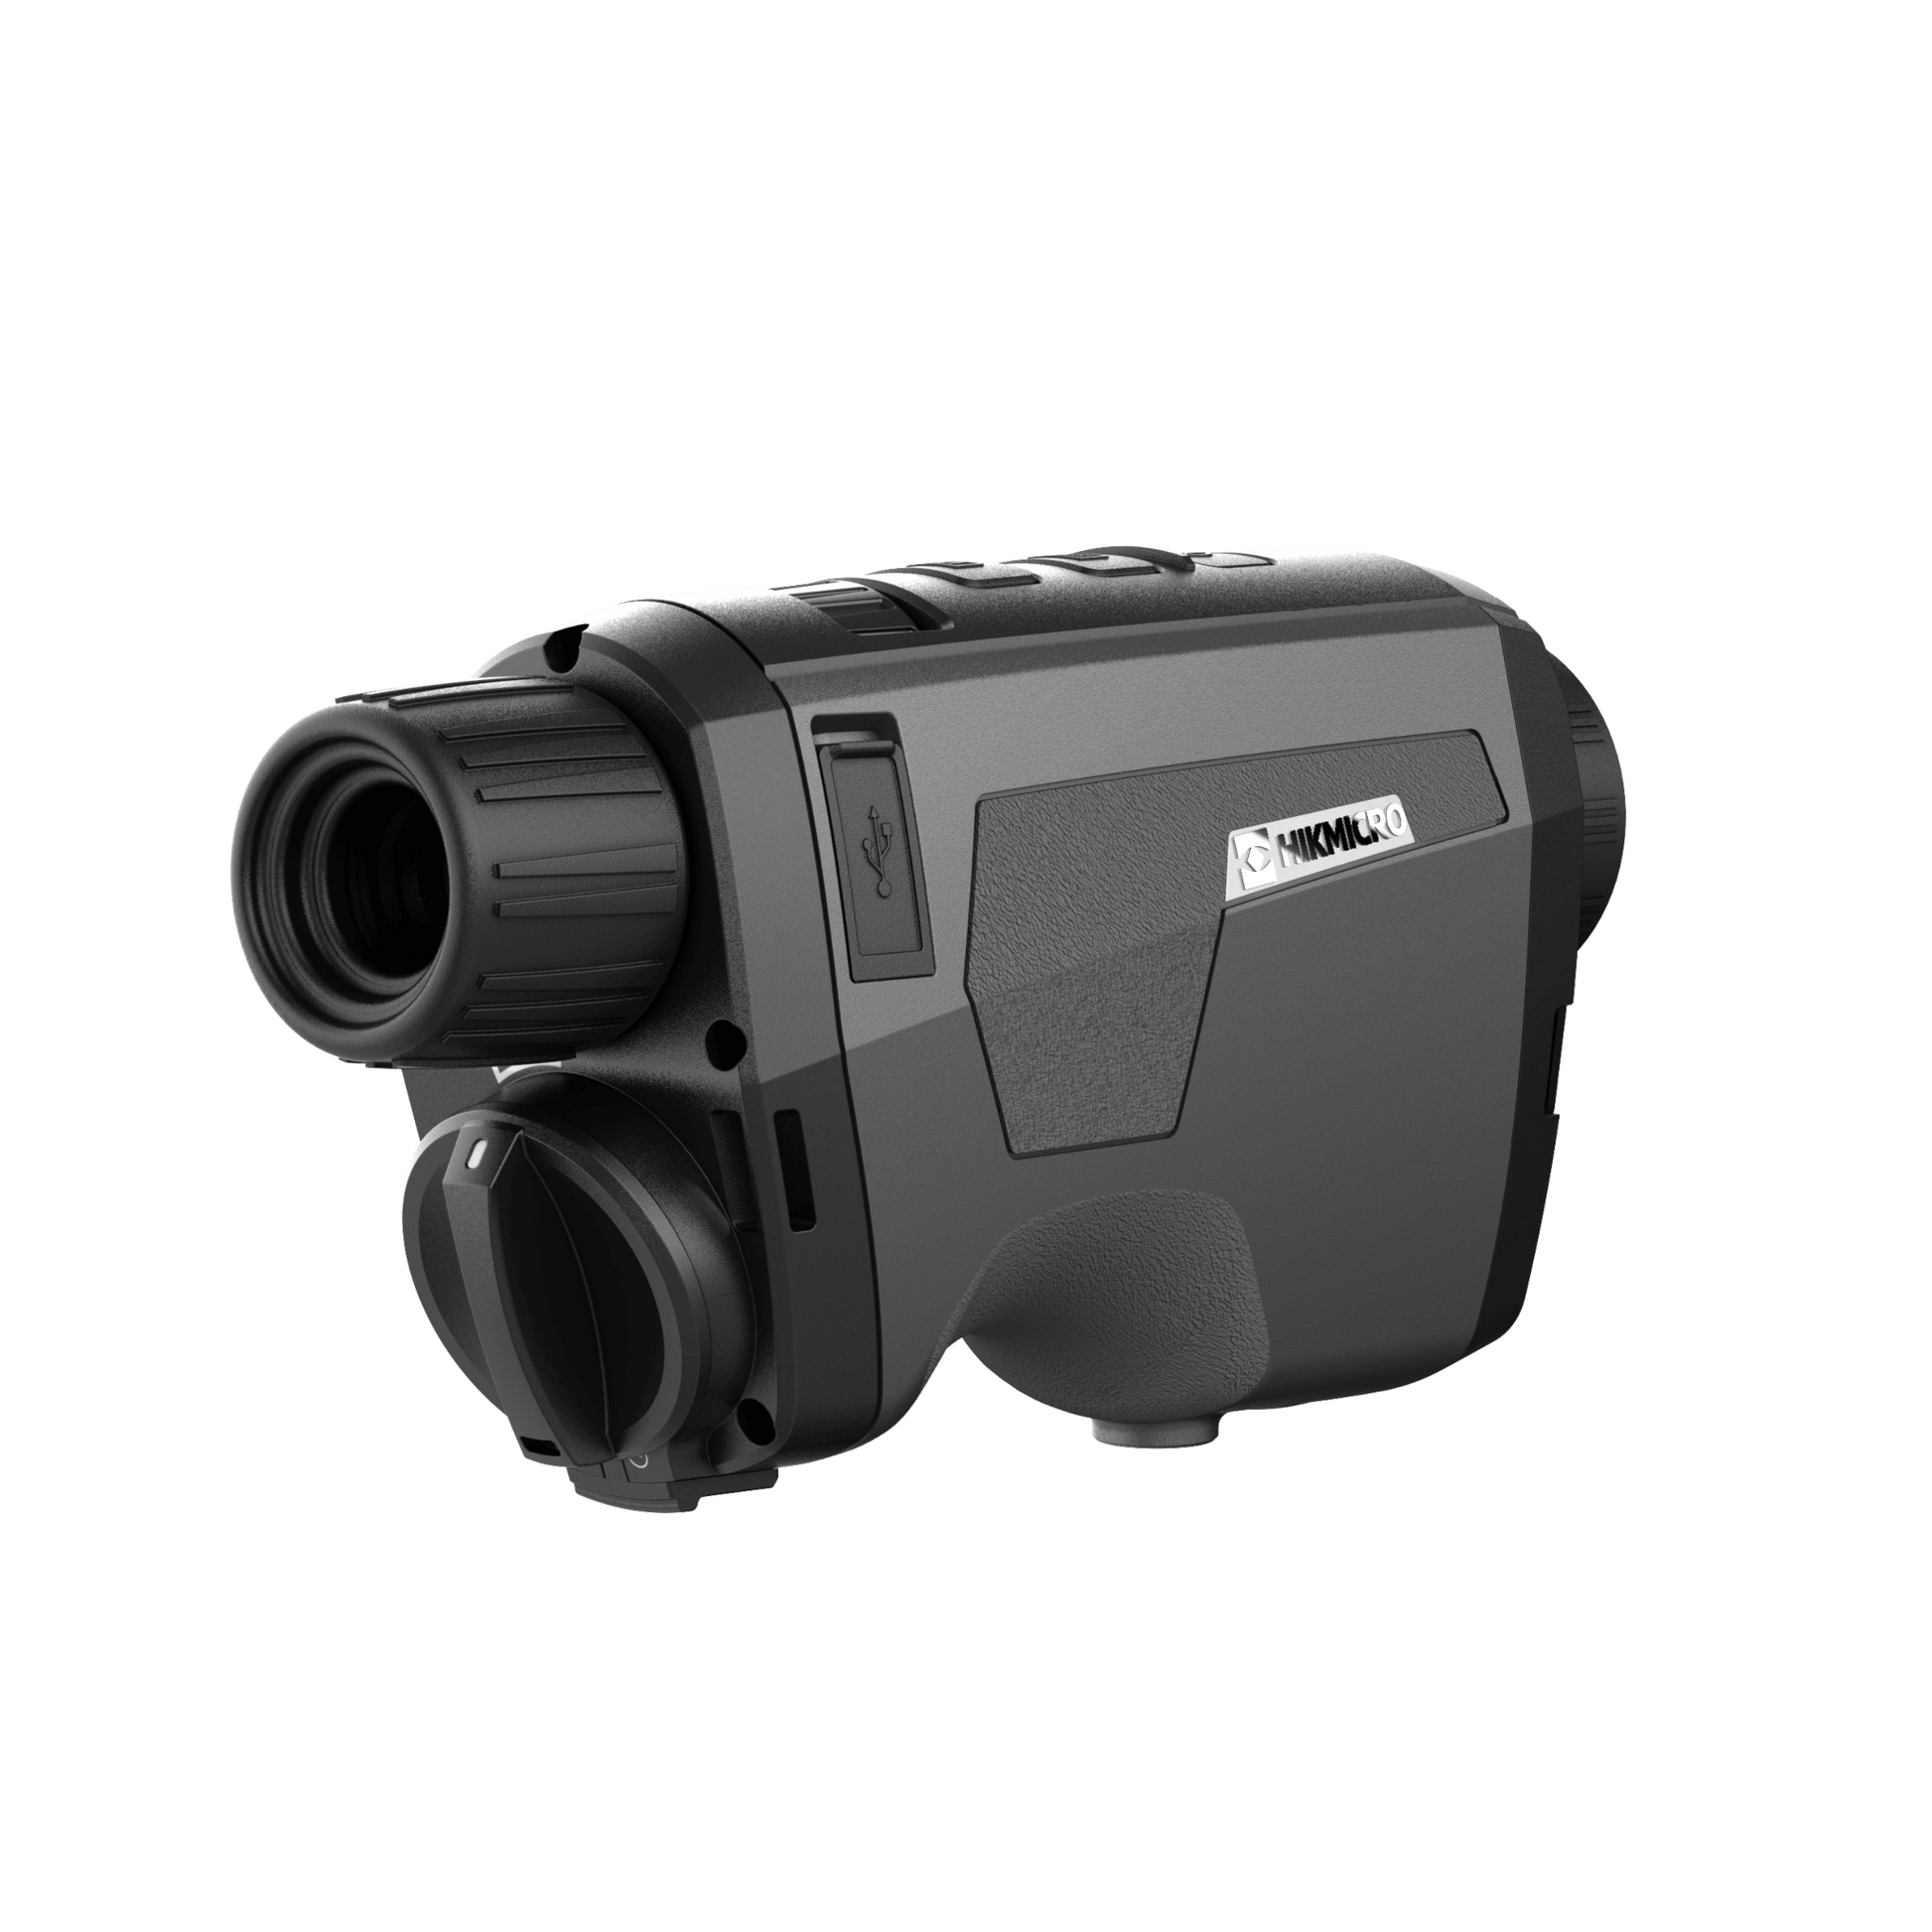 Cape Thermal imaging monocular for sale - HikMicro Gryphon GH25L Handheld thermal monocular rear view without eye relief attachment